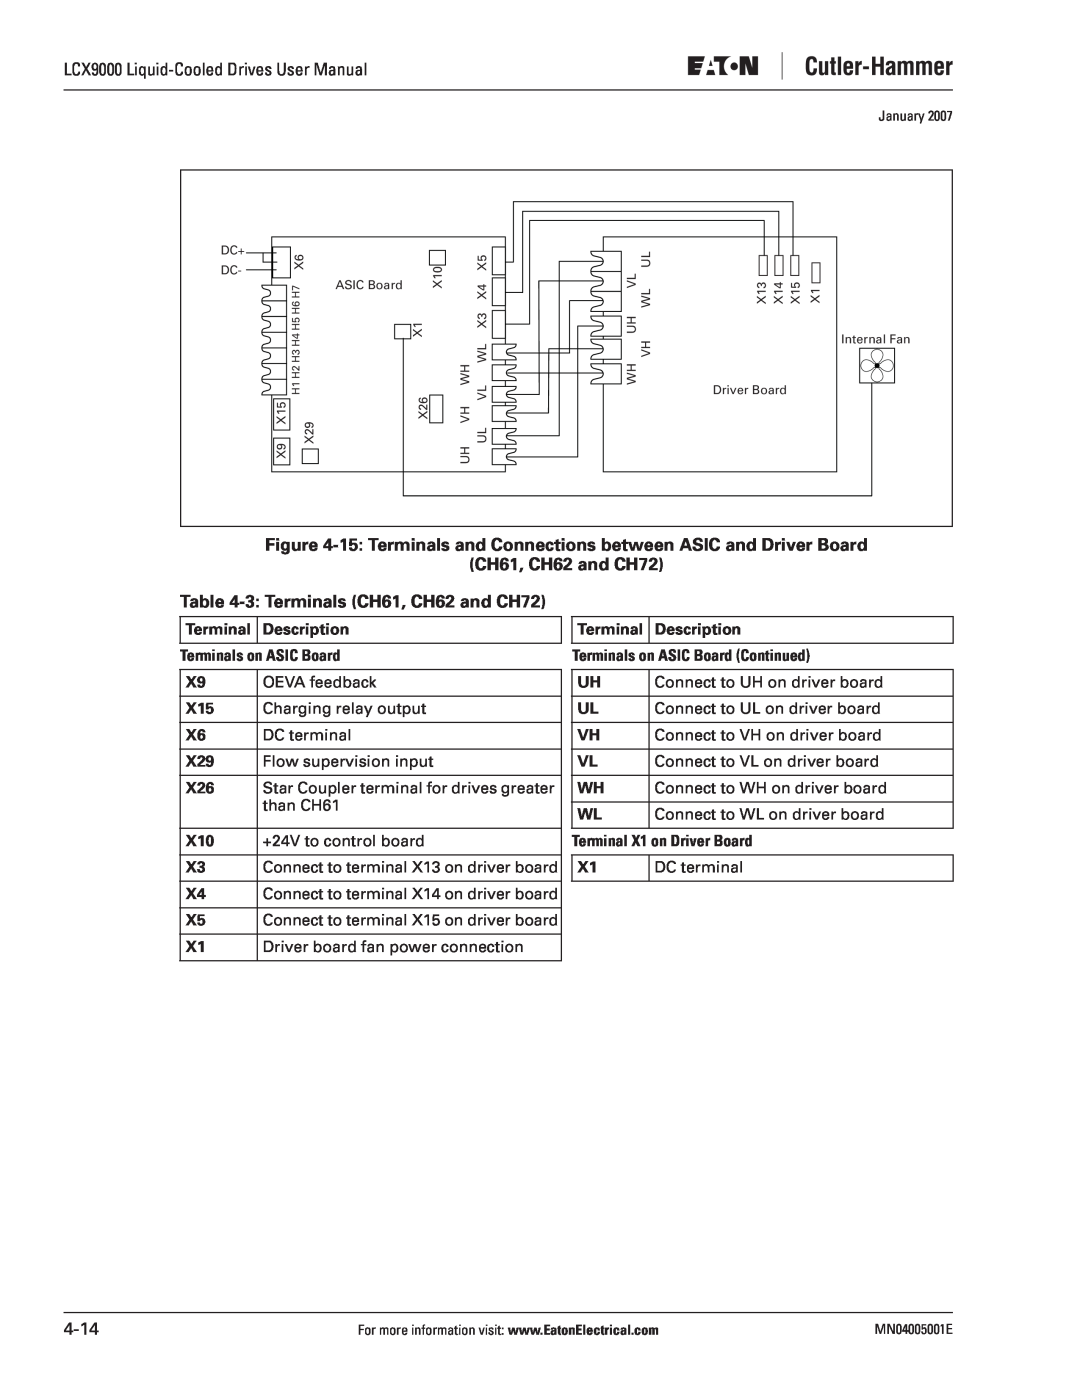 J. T. Eaton LCX9000 user manual 15 Terminals and Connections between ASIC and Driver Board, X29 Flow supervision input 